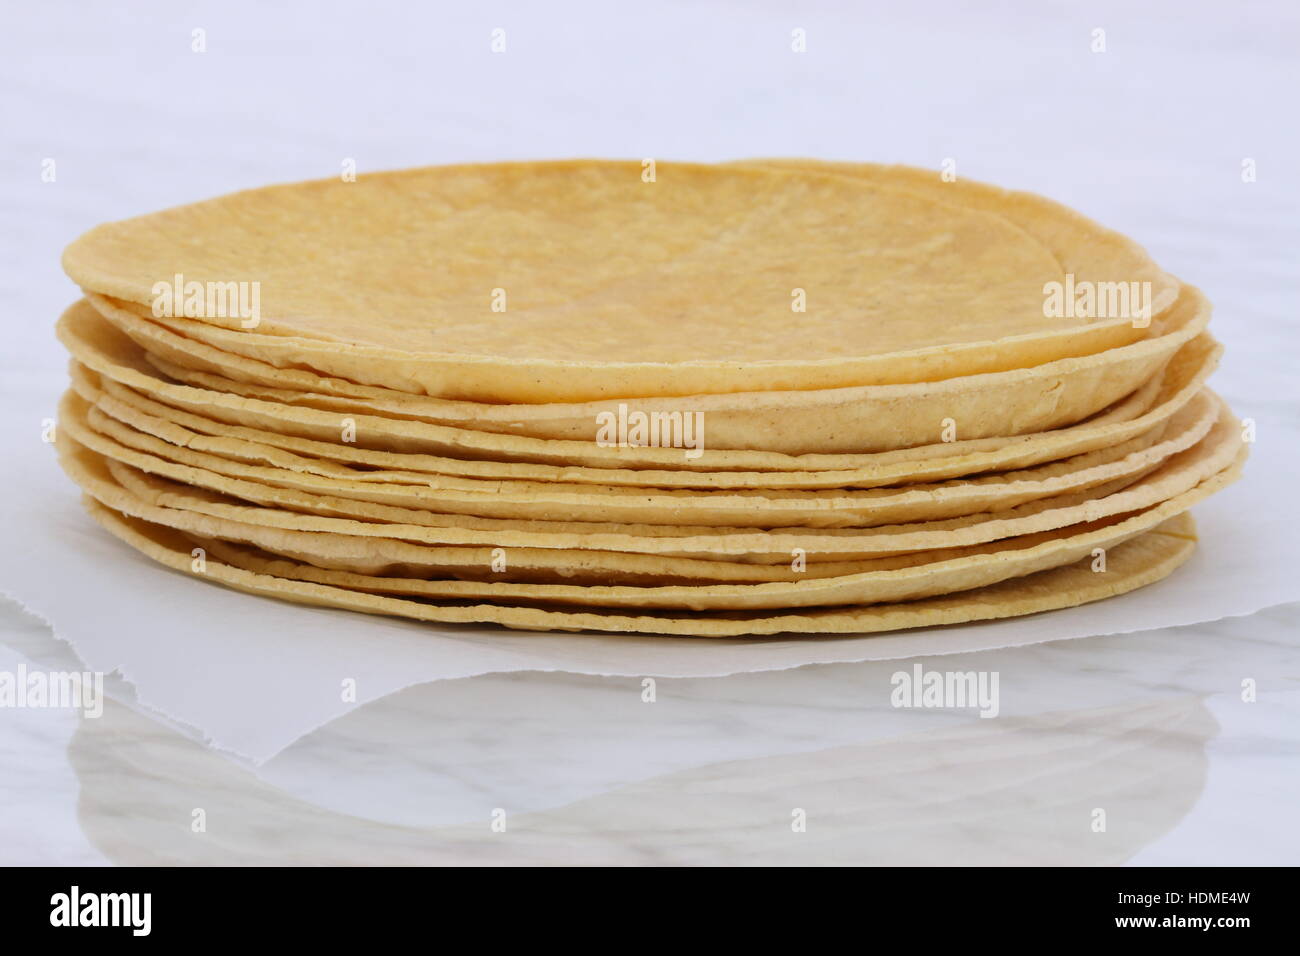 https://c8.alamy.com/comp/HDME4W/mexican-corn-tortillas-on-retro-vintage-carrara-marble-perfect-for-HDME4W.jpg